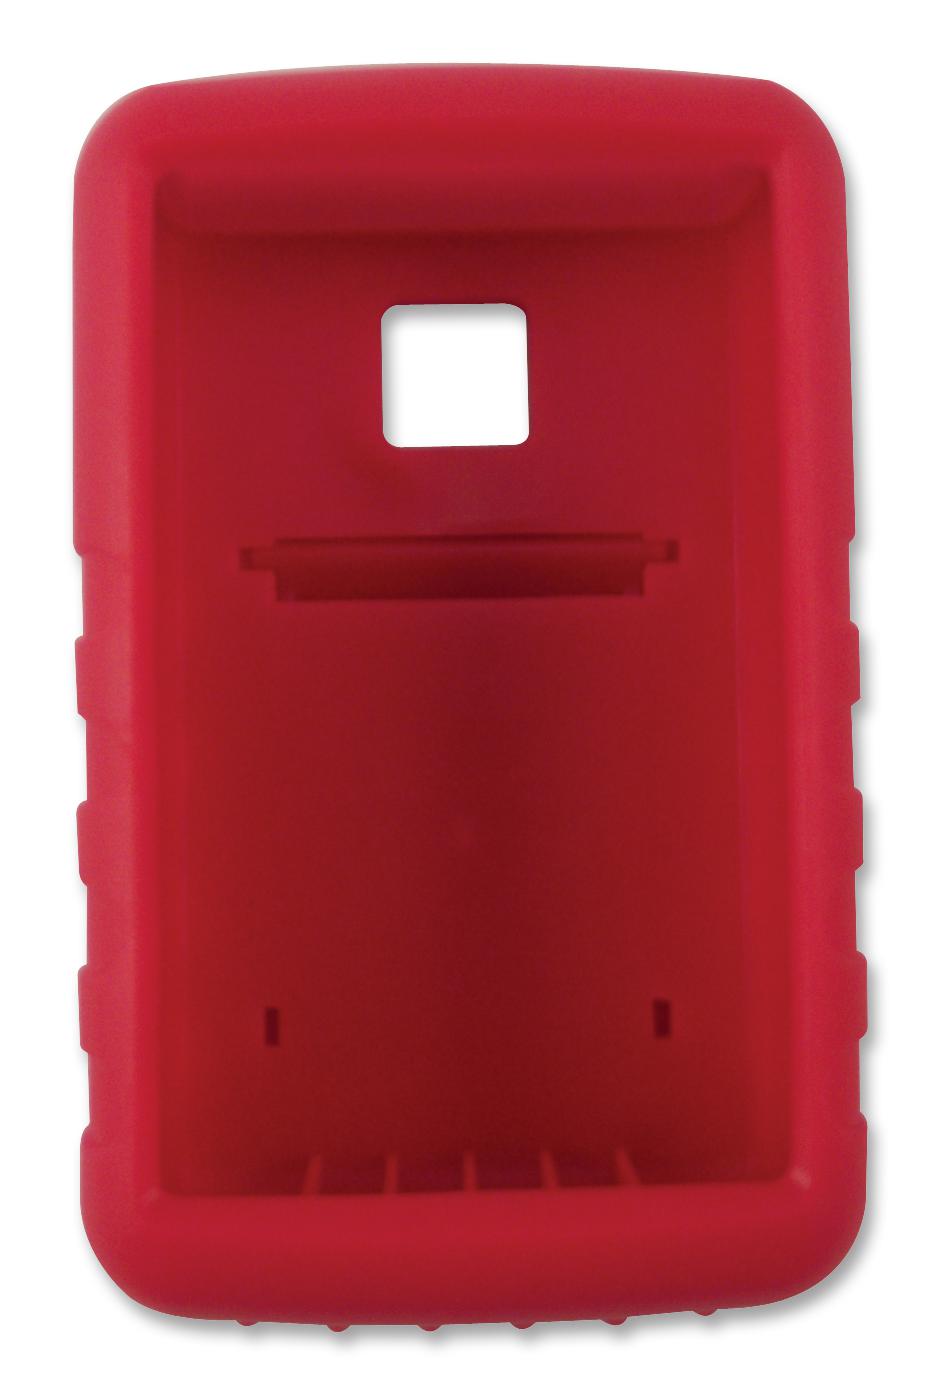 40-RBT-RED BOOT, 40 CASE, RED BOX ENCLOSURES